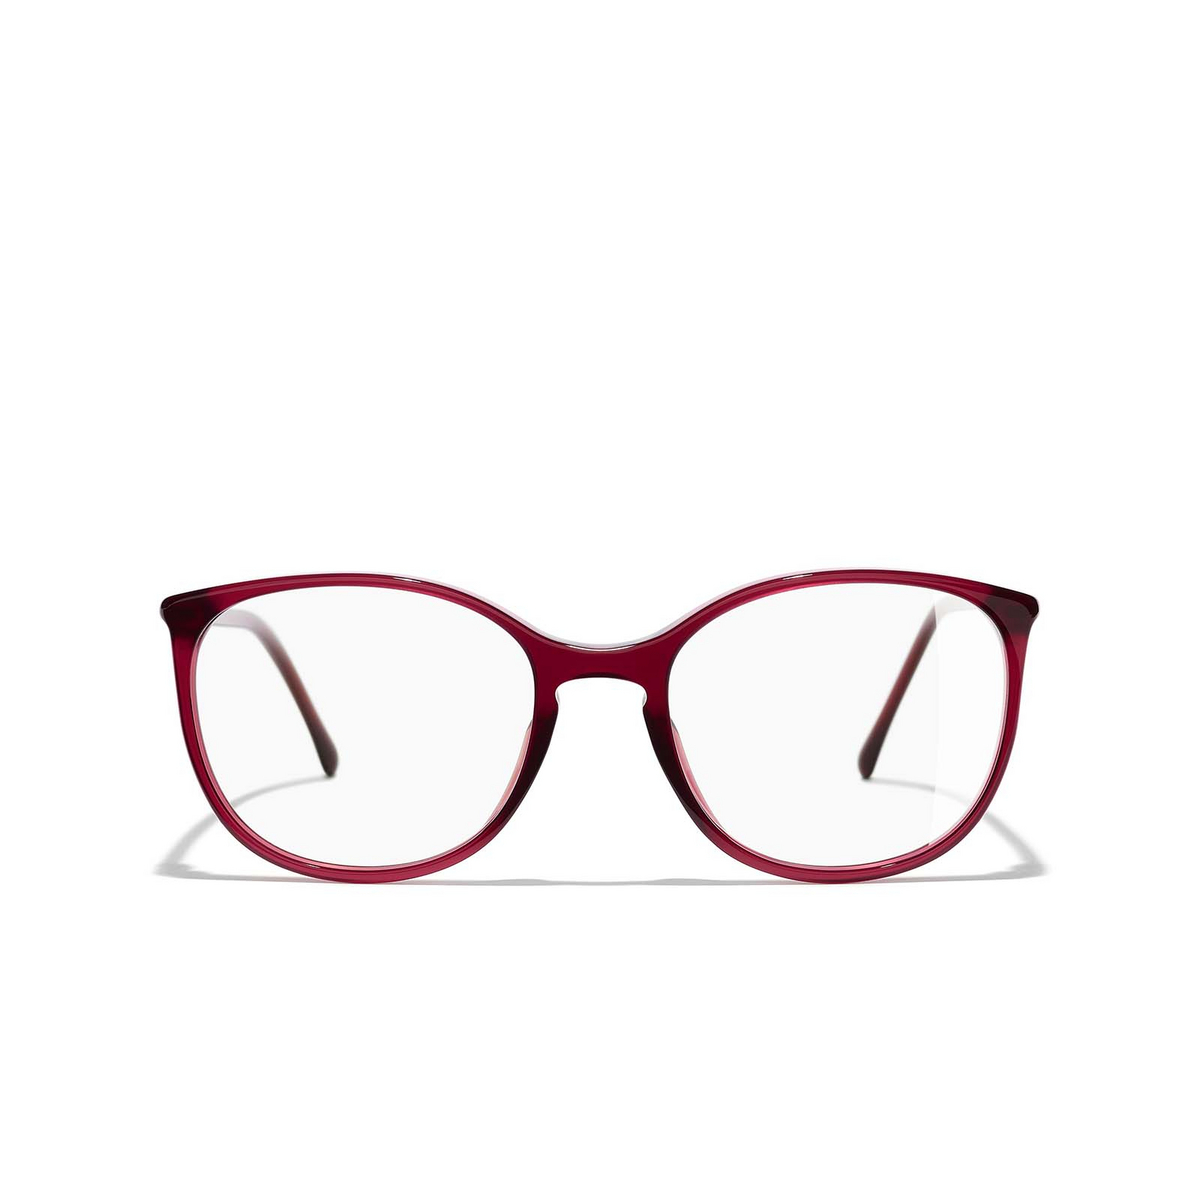 CHANEL round Eyeglasses C539 Red - front view